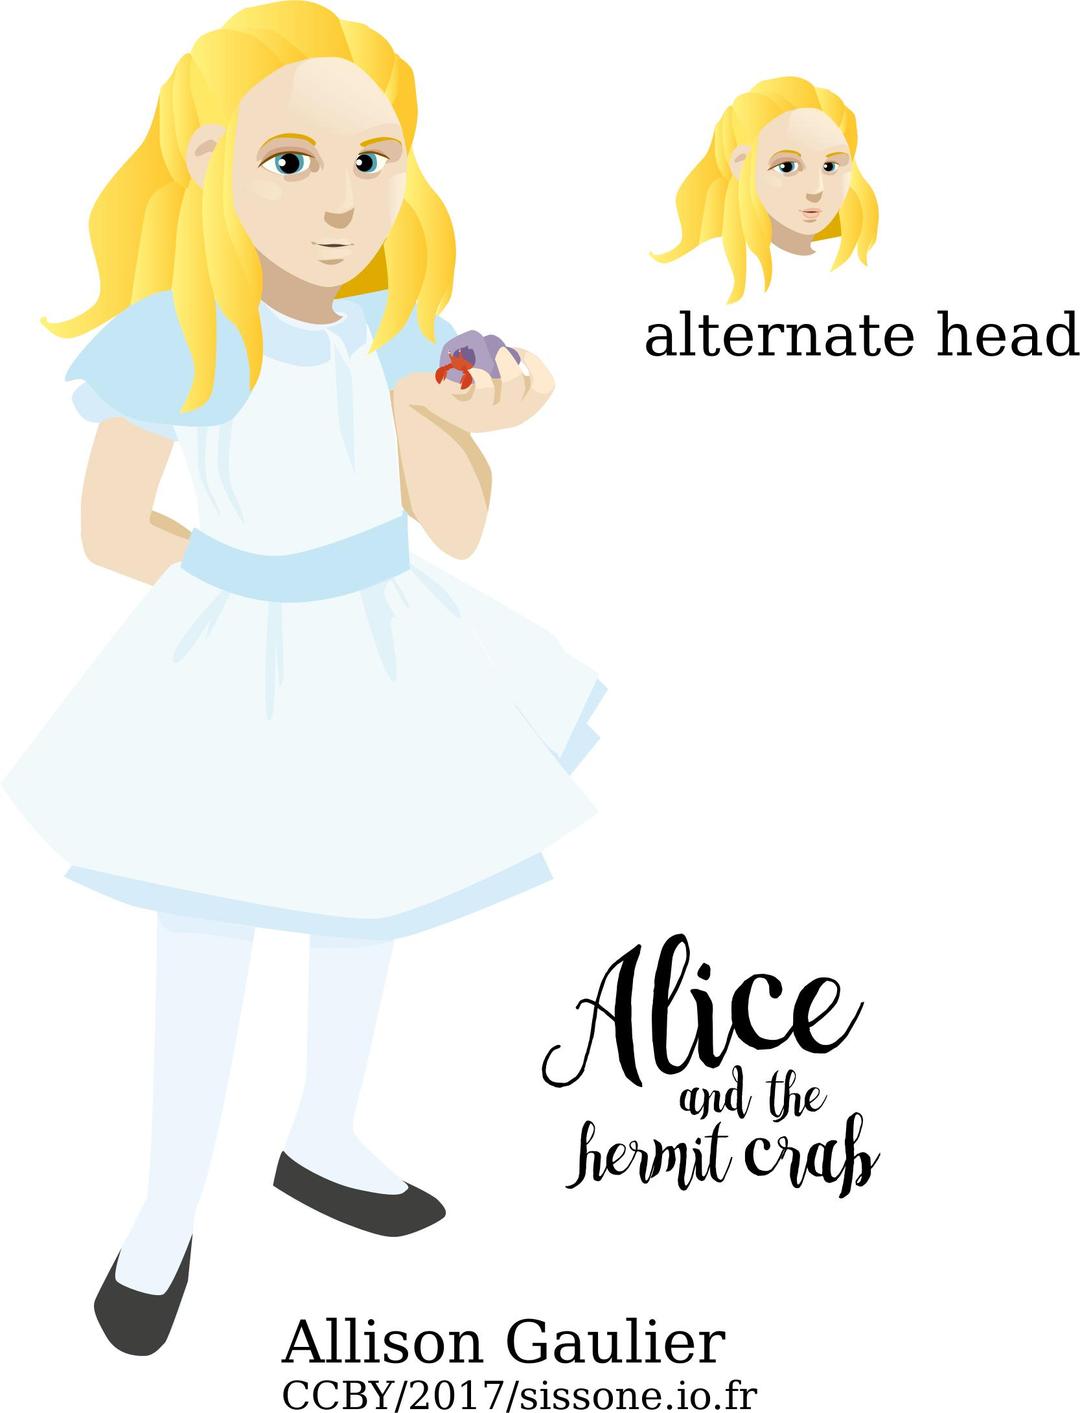 Alice and the hermit crab png transparent